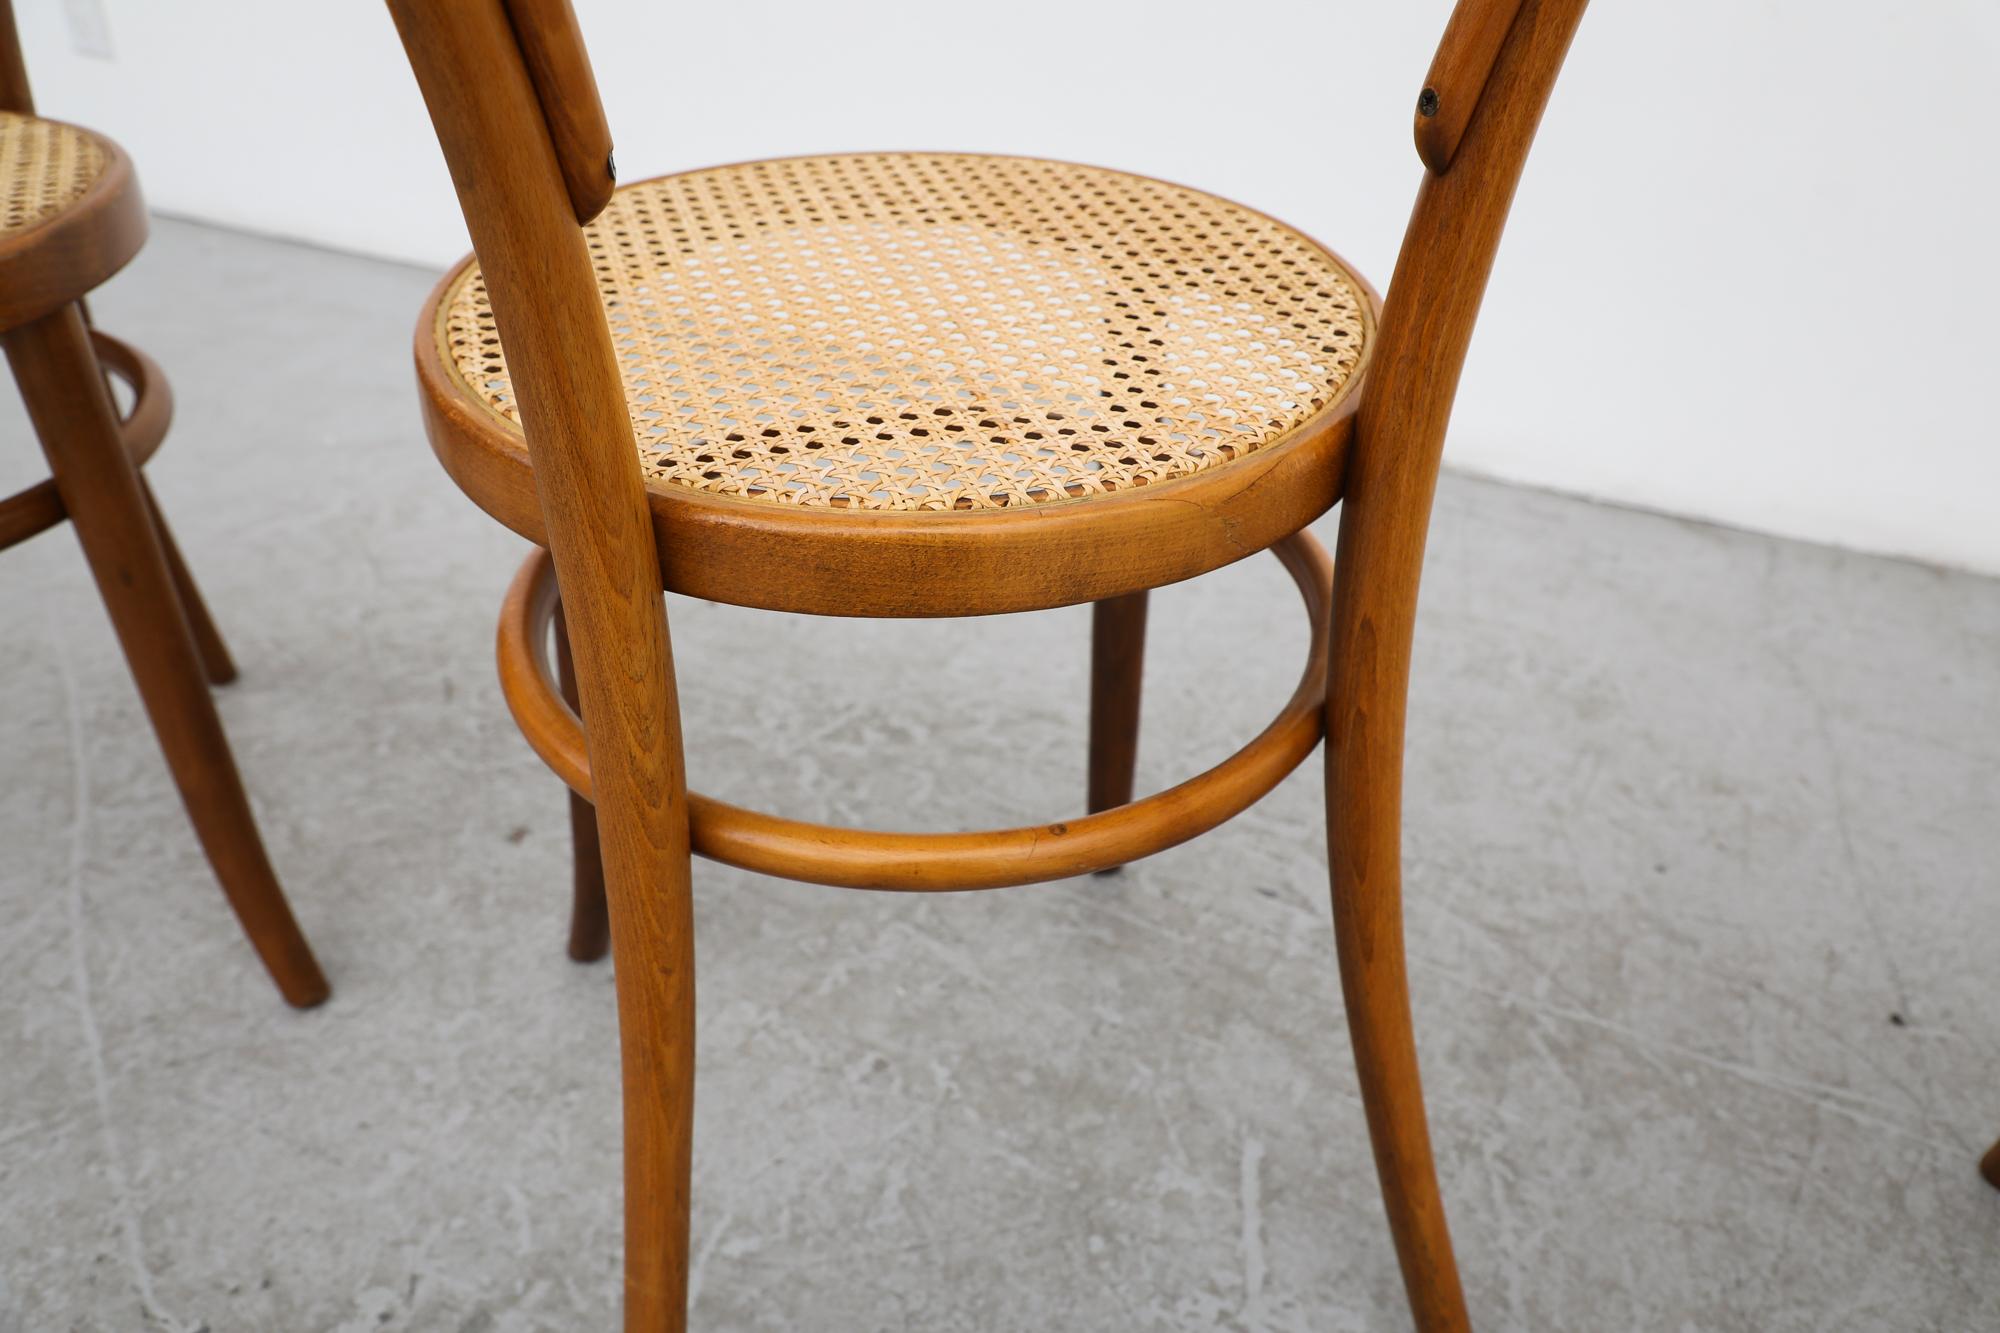 Vintage Thonet No. 14 Bentwood and Cane Café Side Chairs with Cane Seats For Sale 5